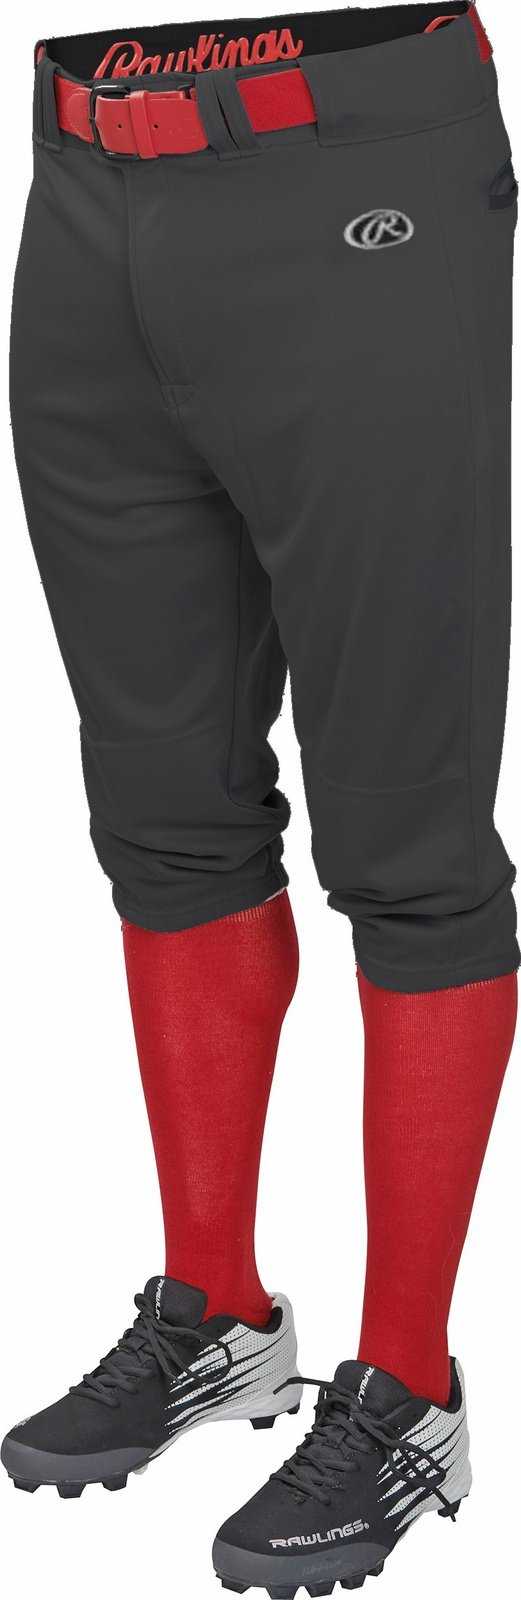 Rawlings Adult Solid Launch Knicker Pant LNCHKP - Black